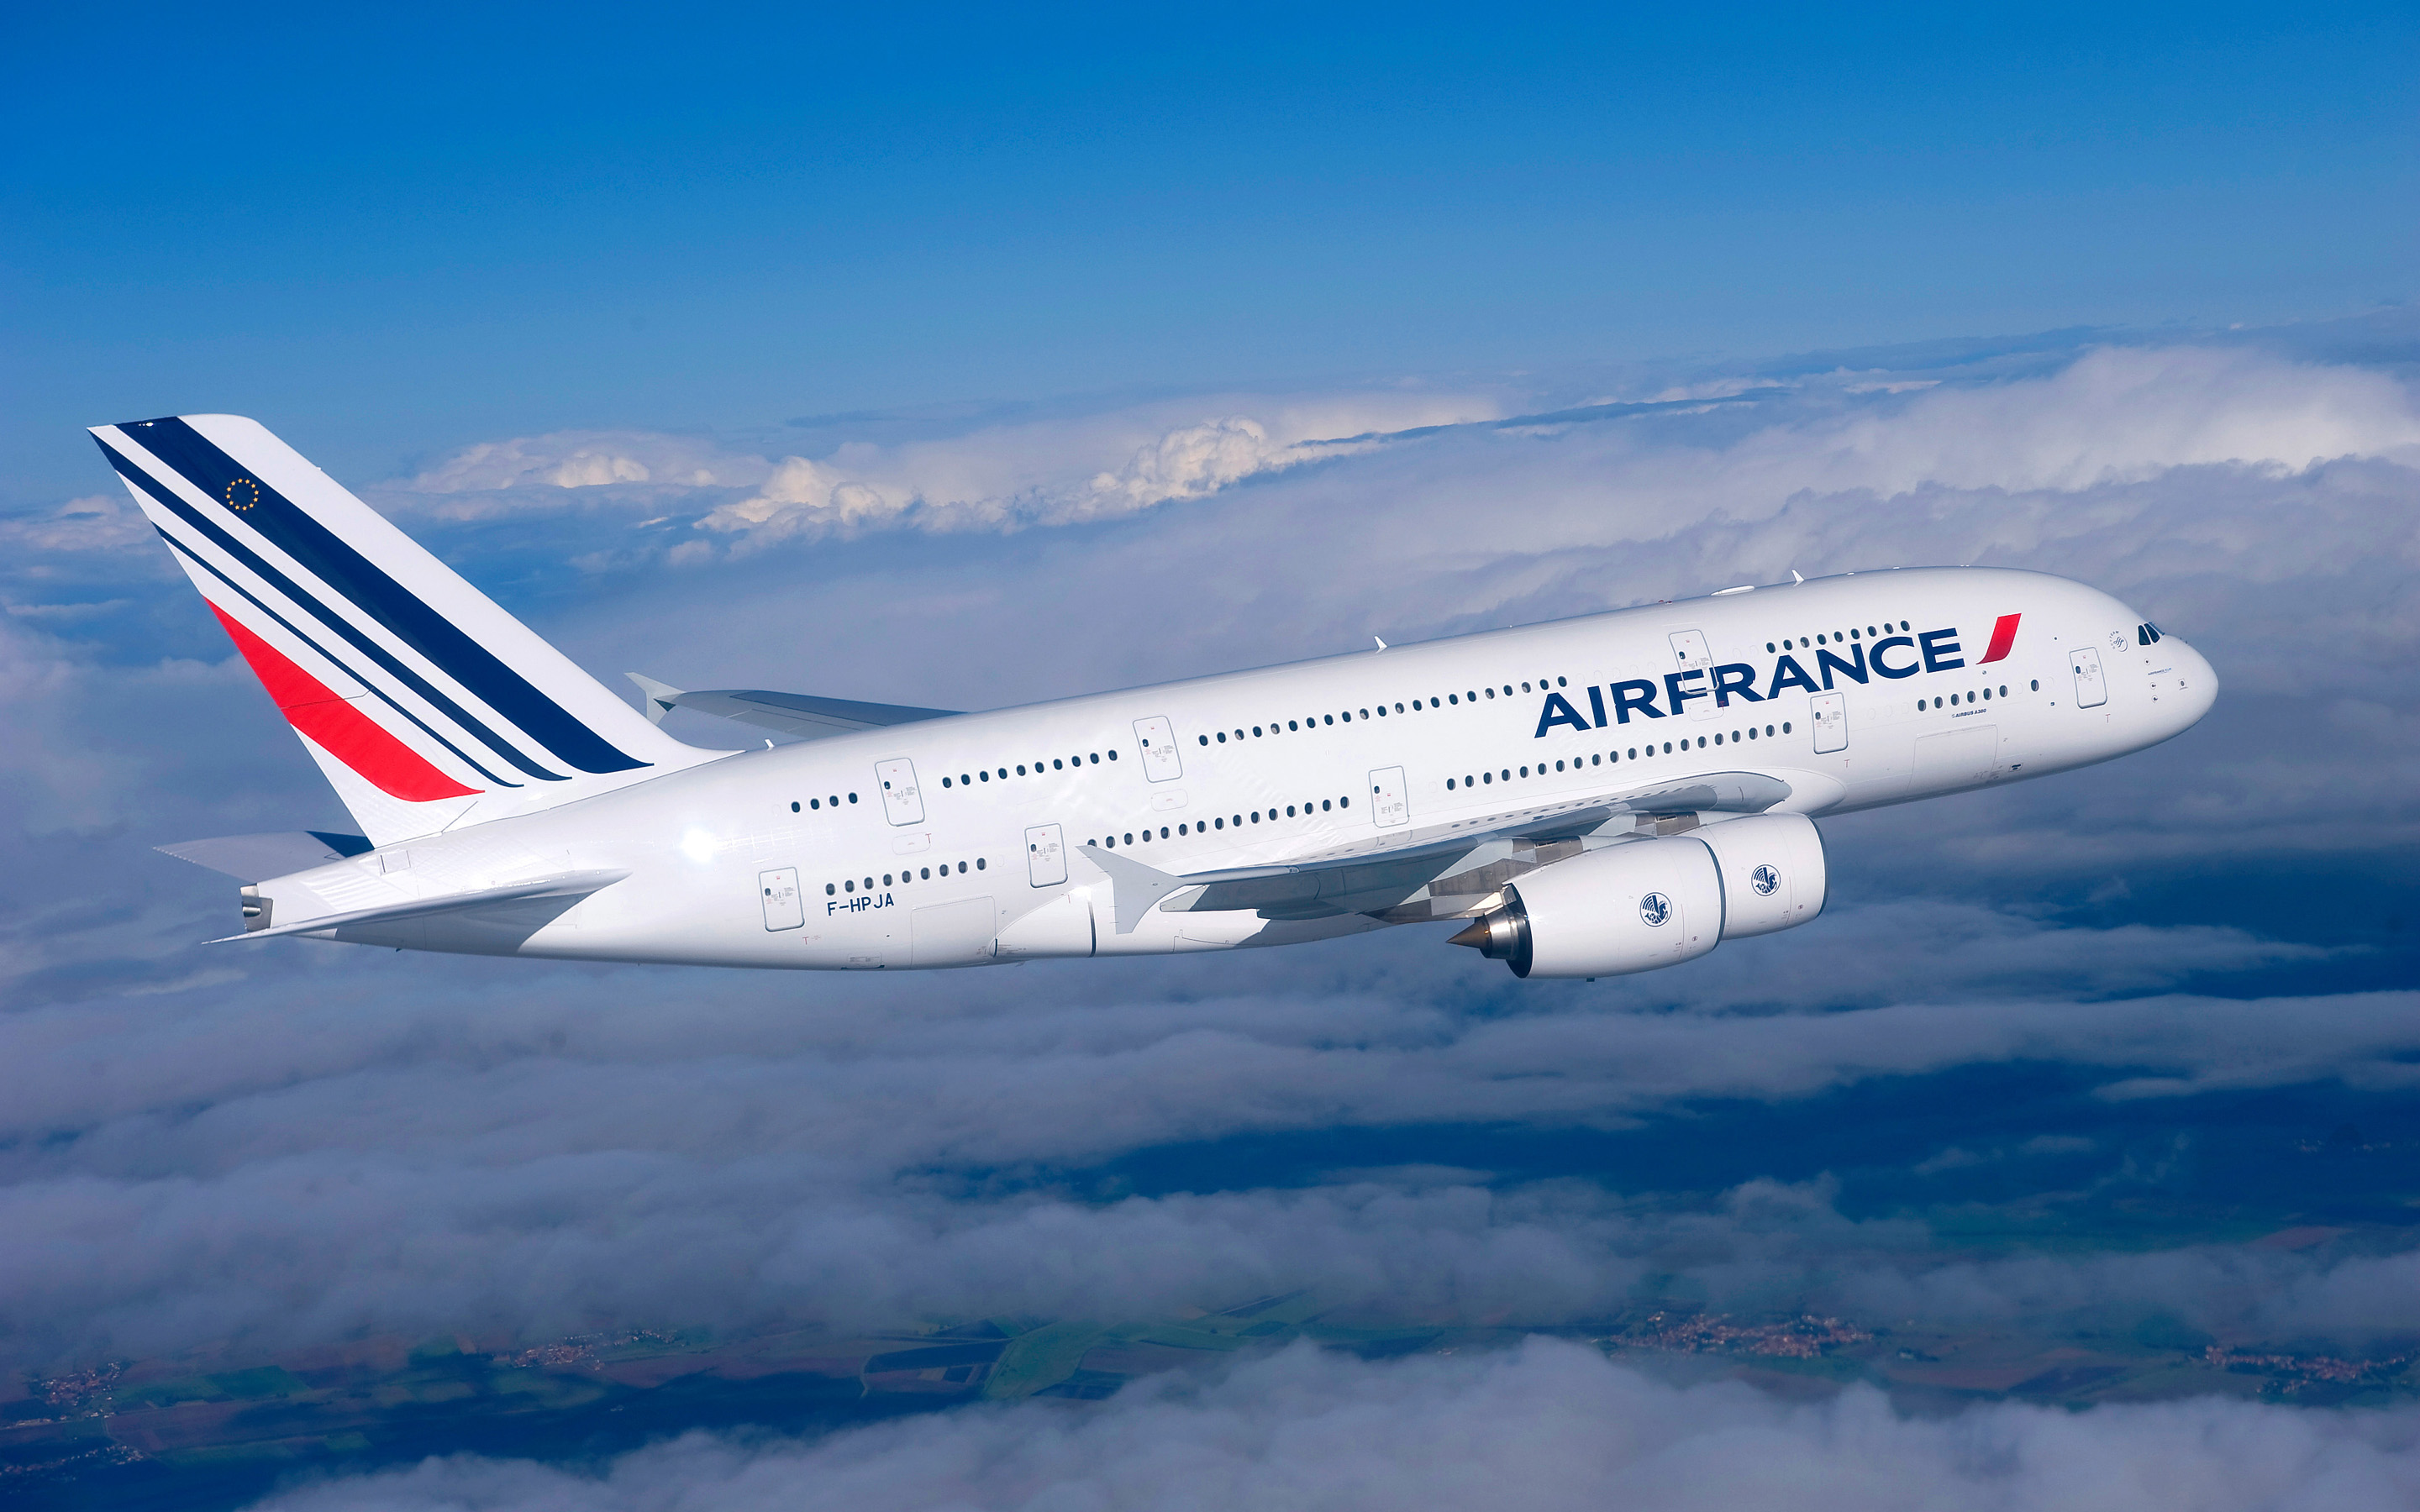 Download Wallpaper Airbus А Air France, Largest Passenger Airliner, Twin Aisle Aircraft, Wide Body Aircraft, Air Travel, Airplane In The Sky, Airbus For Desktop With Resolution 2880x1800. High Quality HD Picture Wallpaper